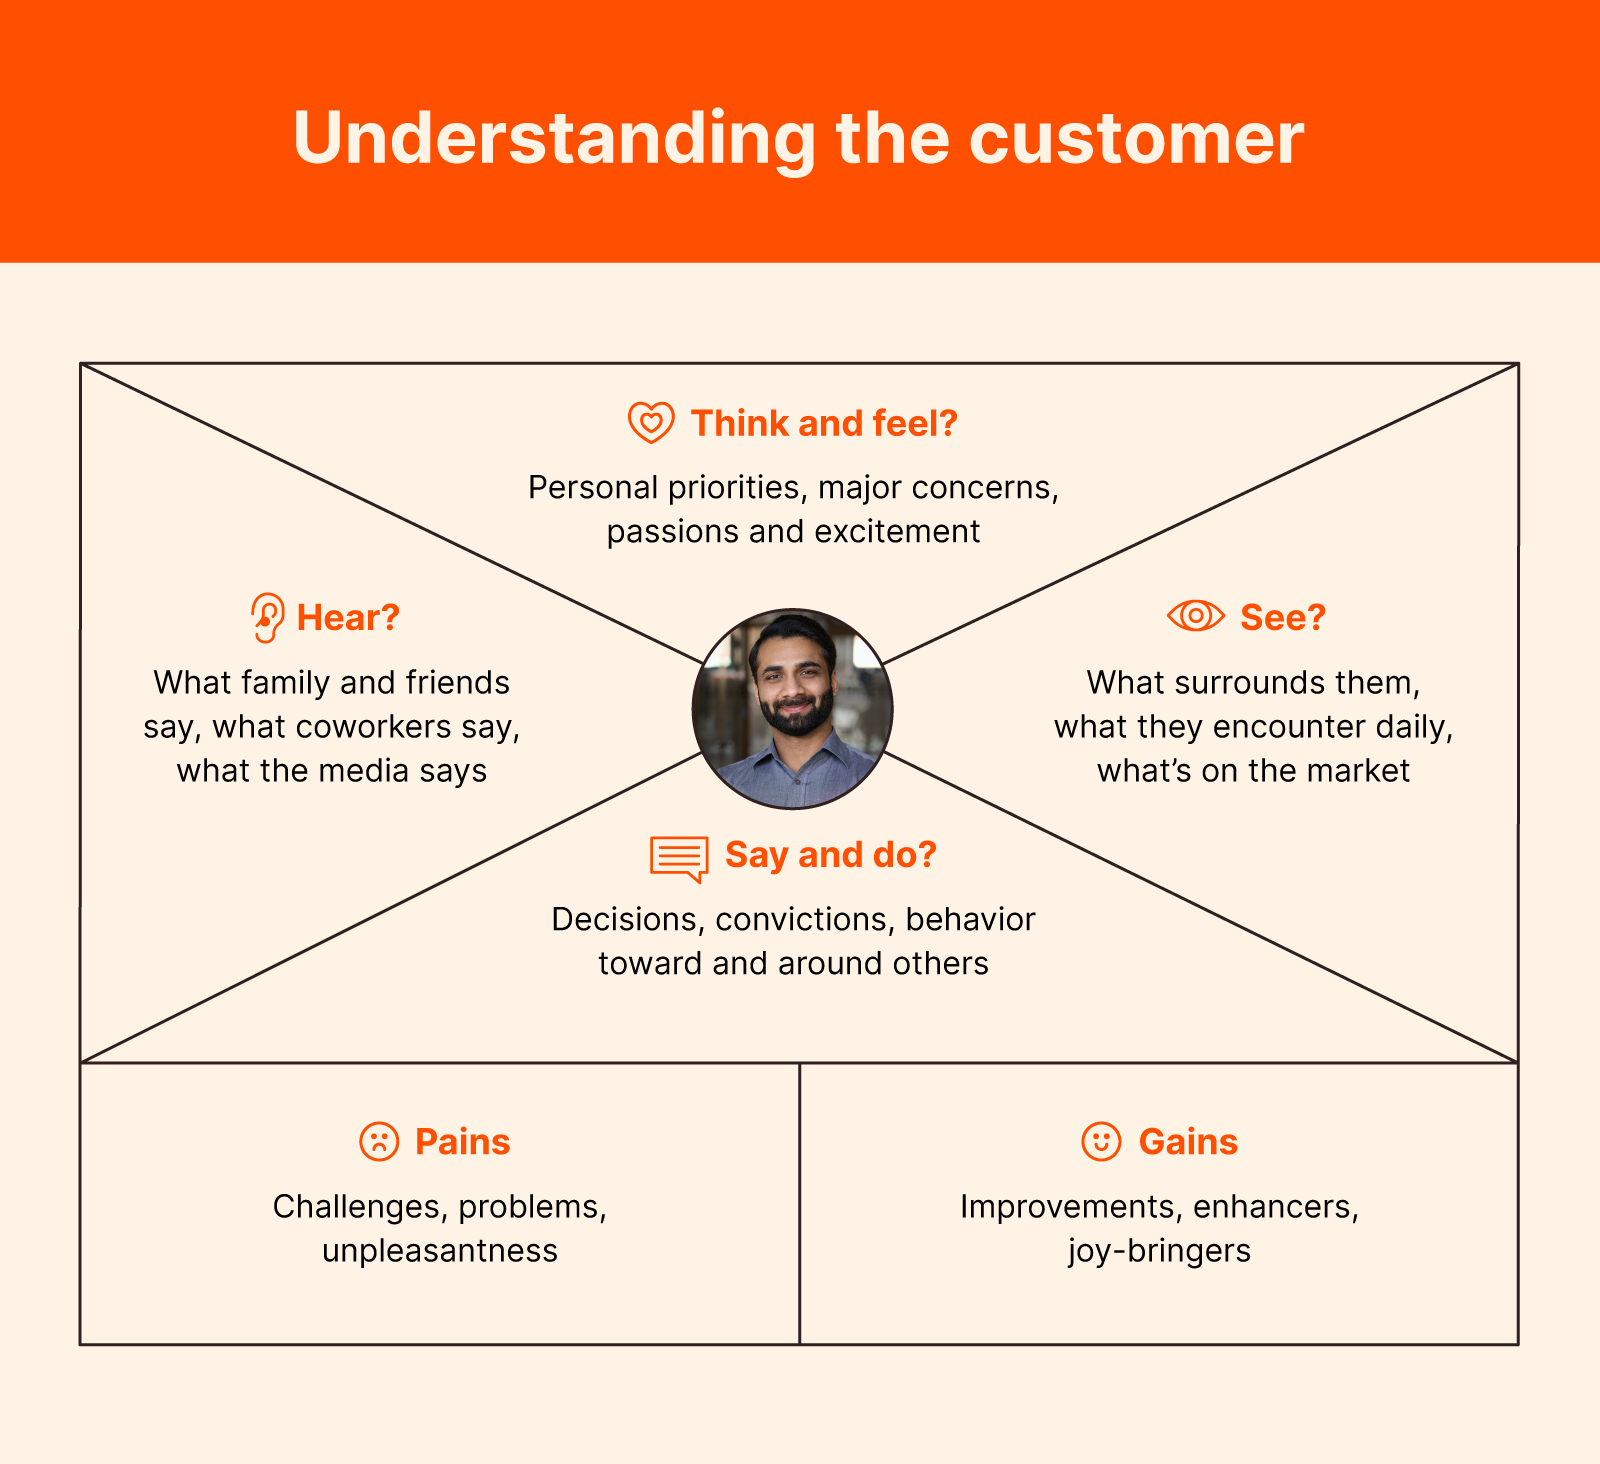 Pains and gains: How to meet customer needs